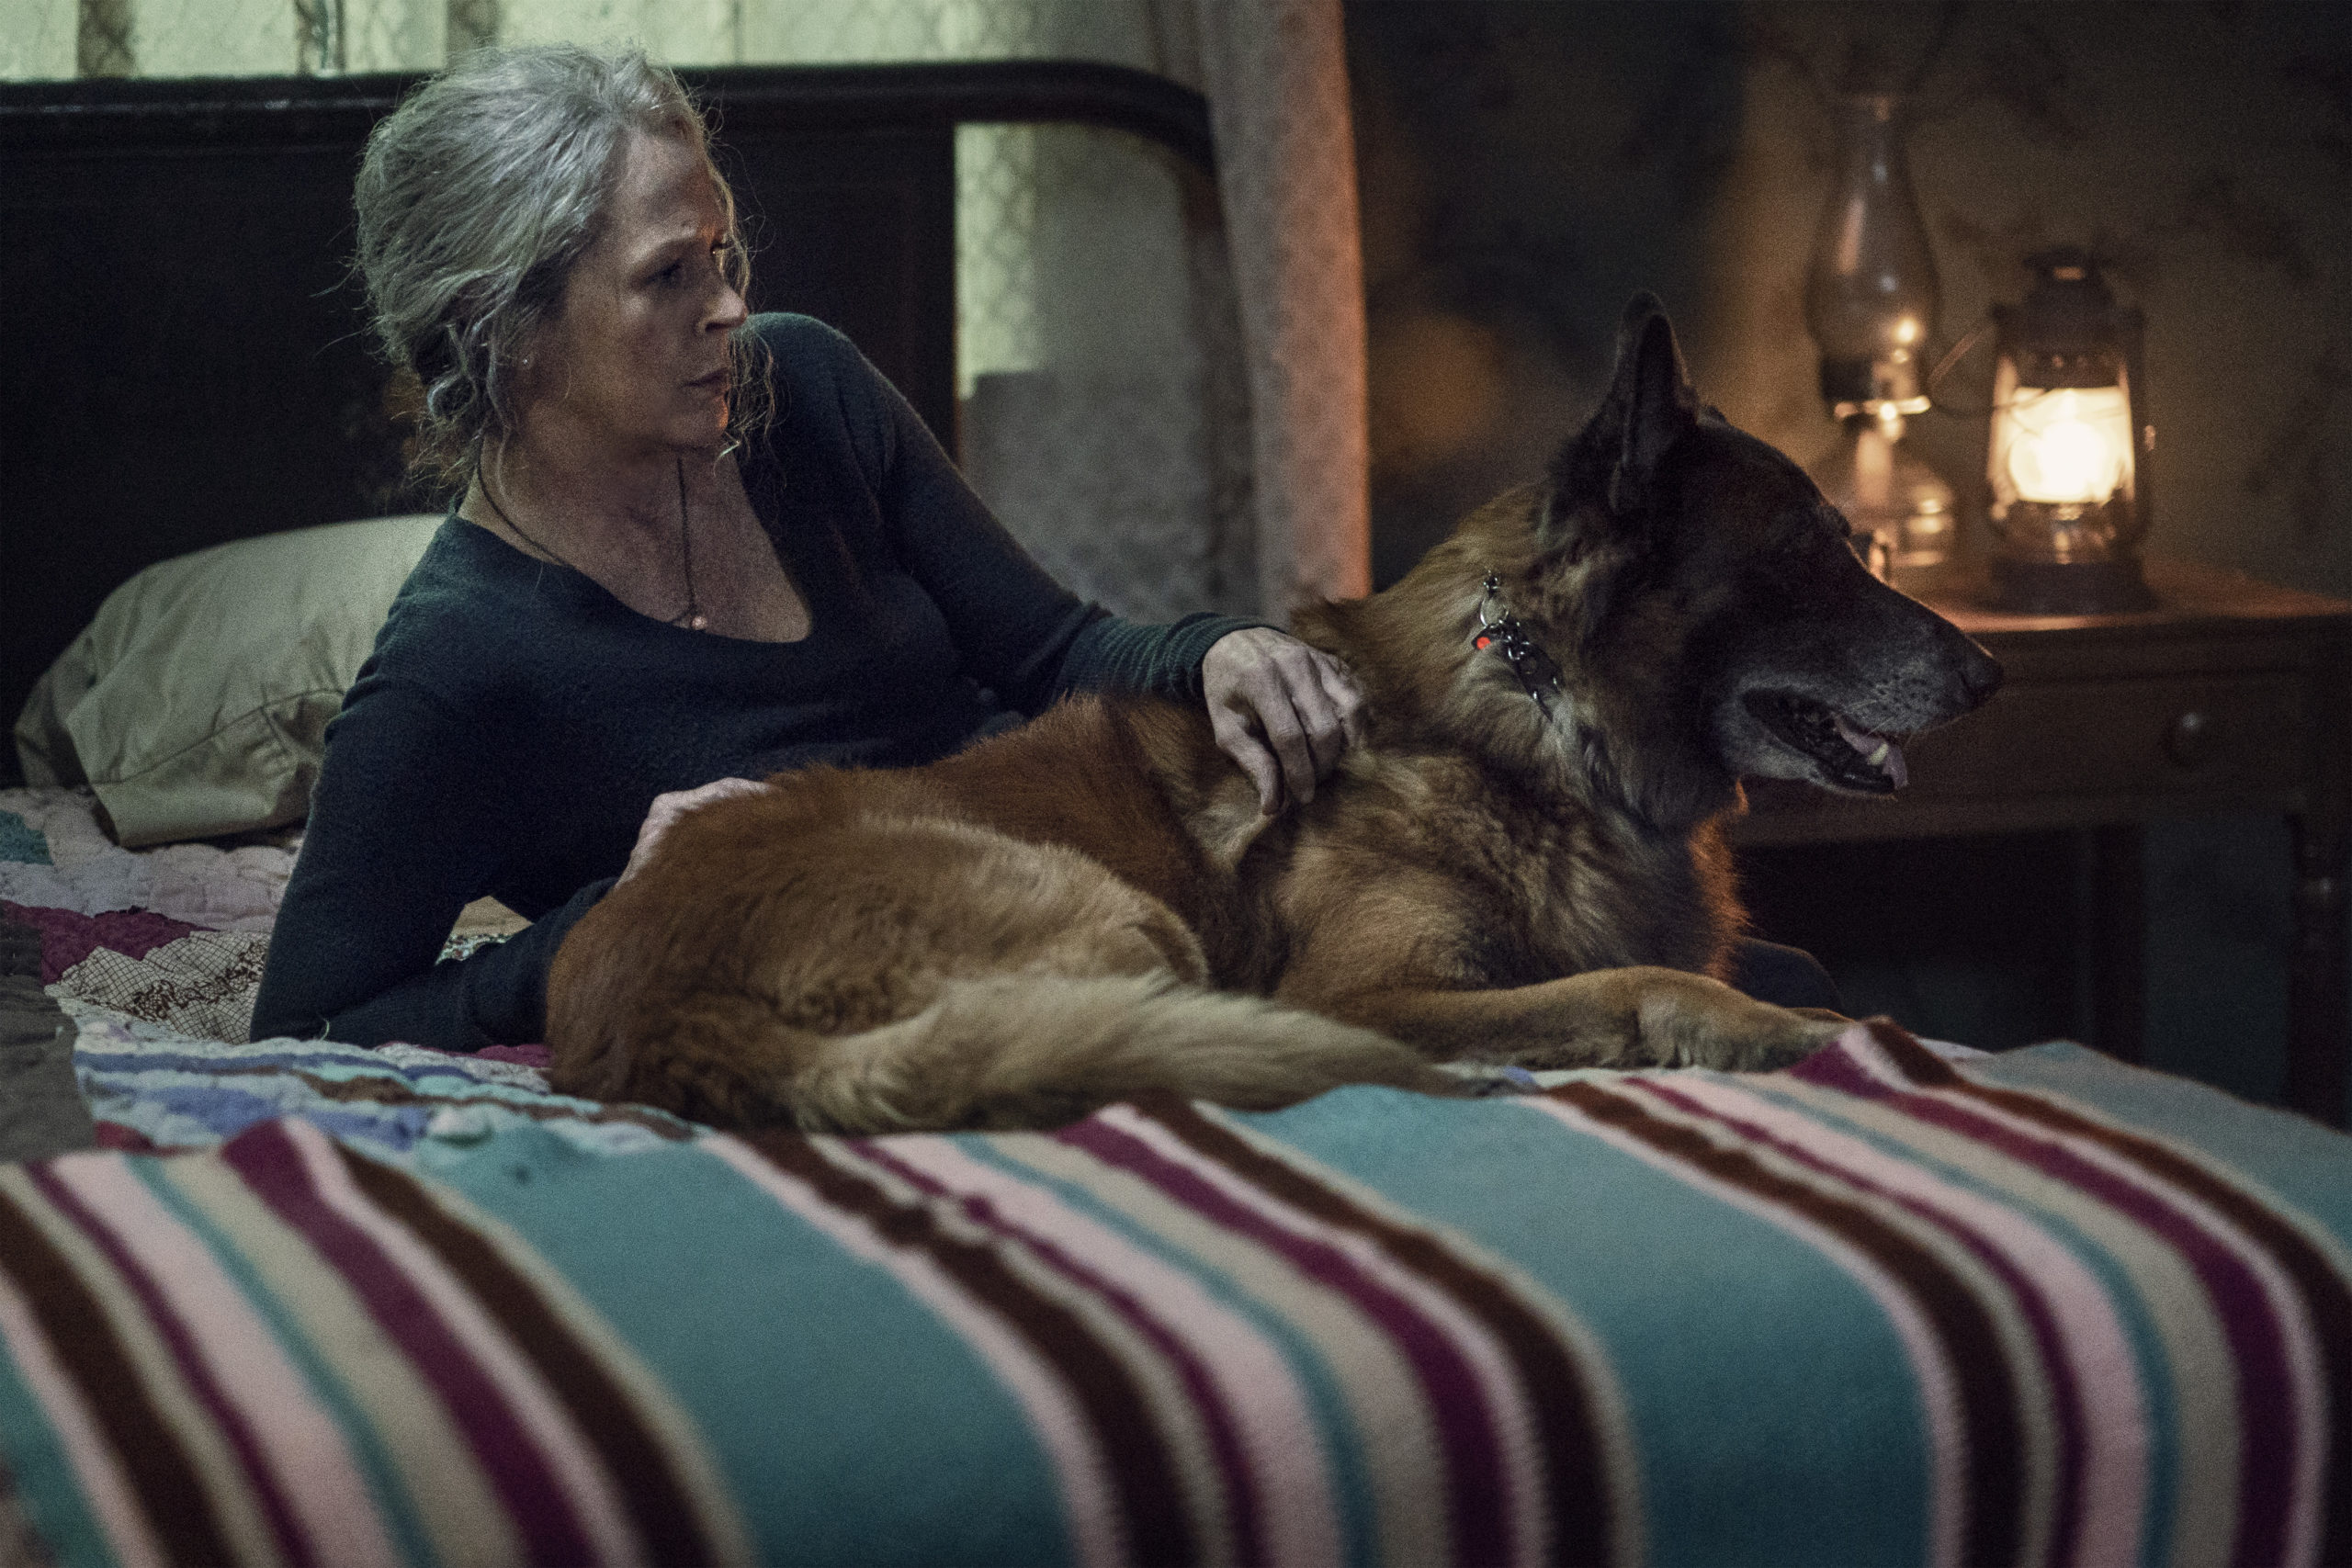 Pictured, left to right: One troubled woman, one good boy. (Image: Edi Ade/AMC)